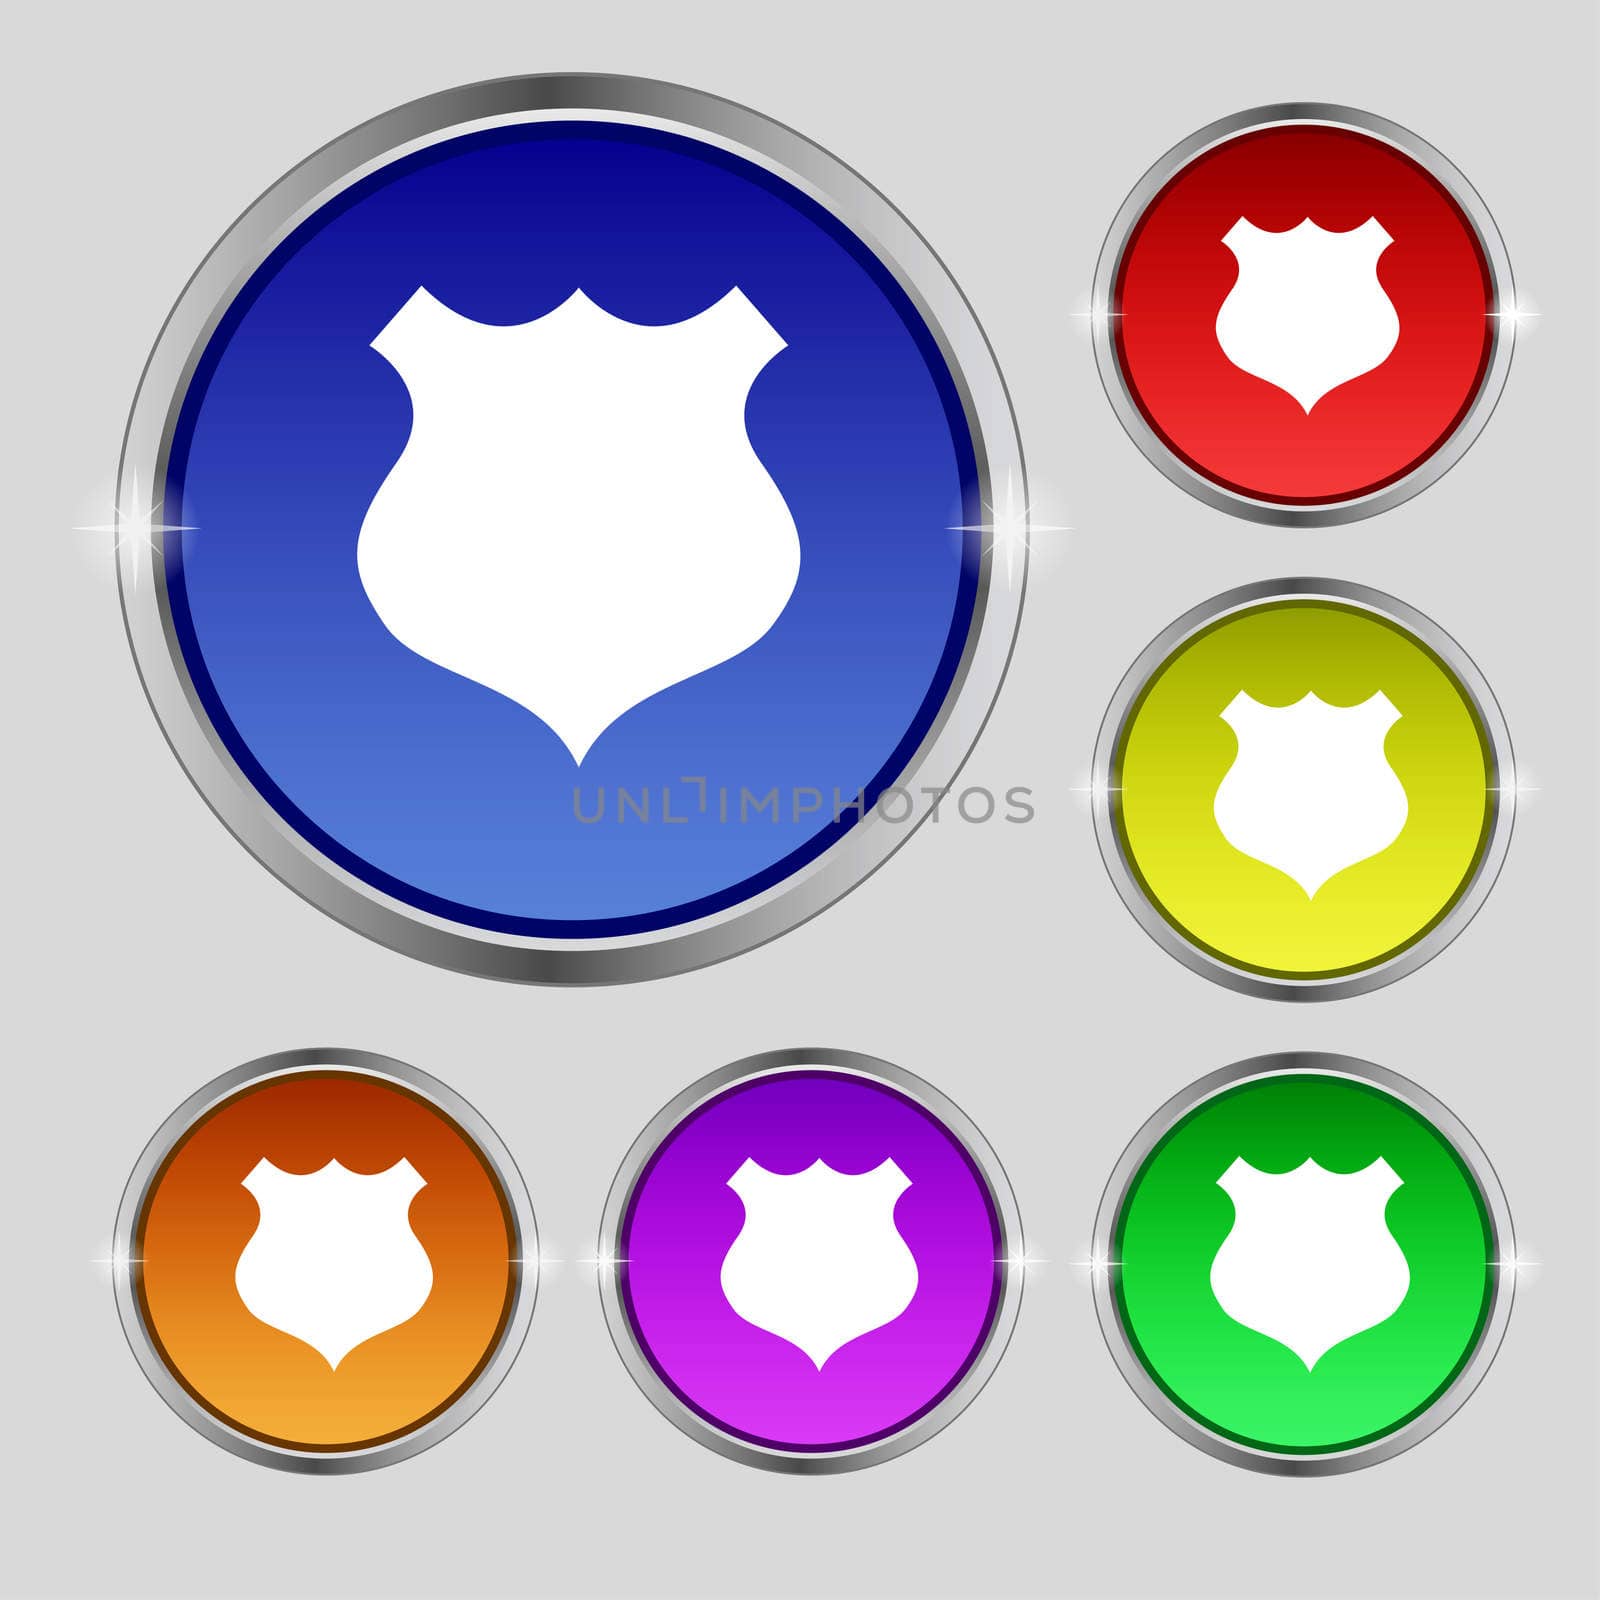 shield icon sign. Round symbol on bright colourful buttons. illustration